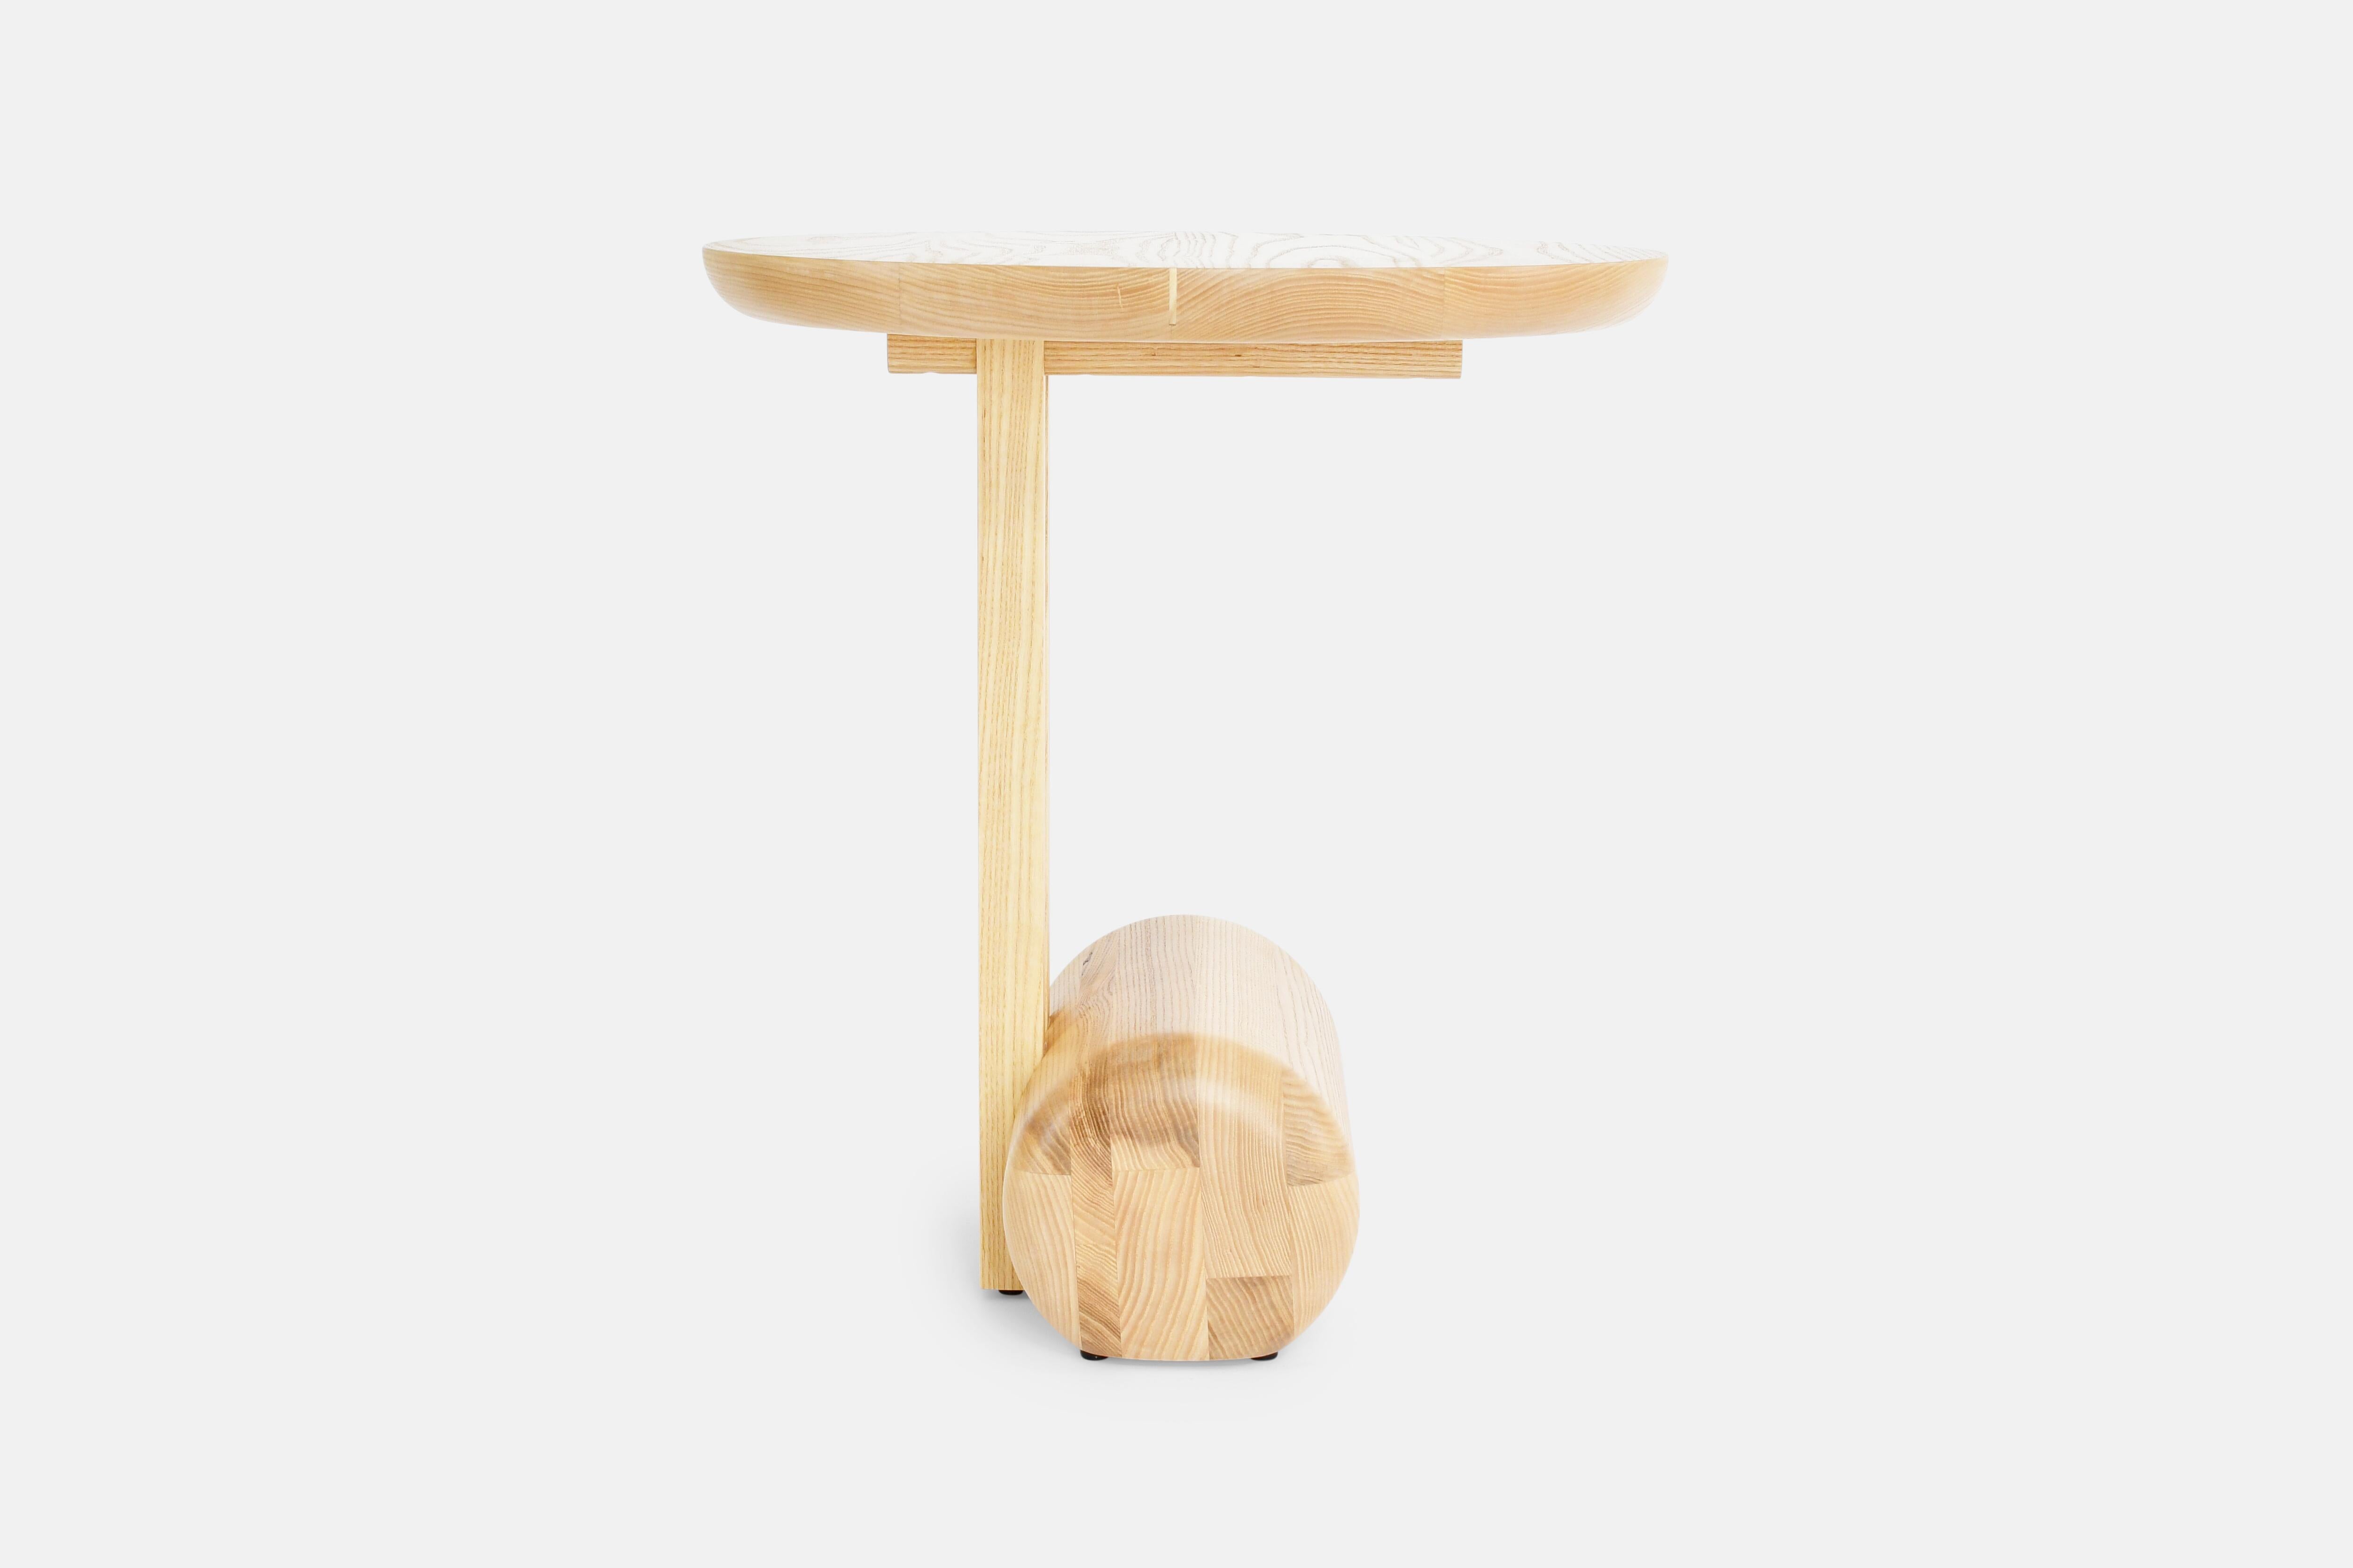 The Silas side table is an exploration of balance and asymmetry with its interpretation in the simplicity of the basic shapes. The round top and rectangular posts are securely anchored to the floor by the solid wood cylindrical base. This pair is